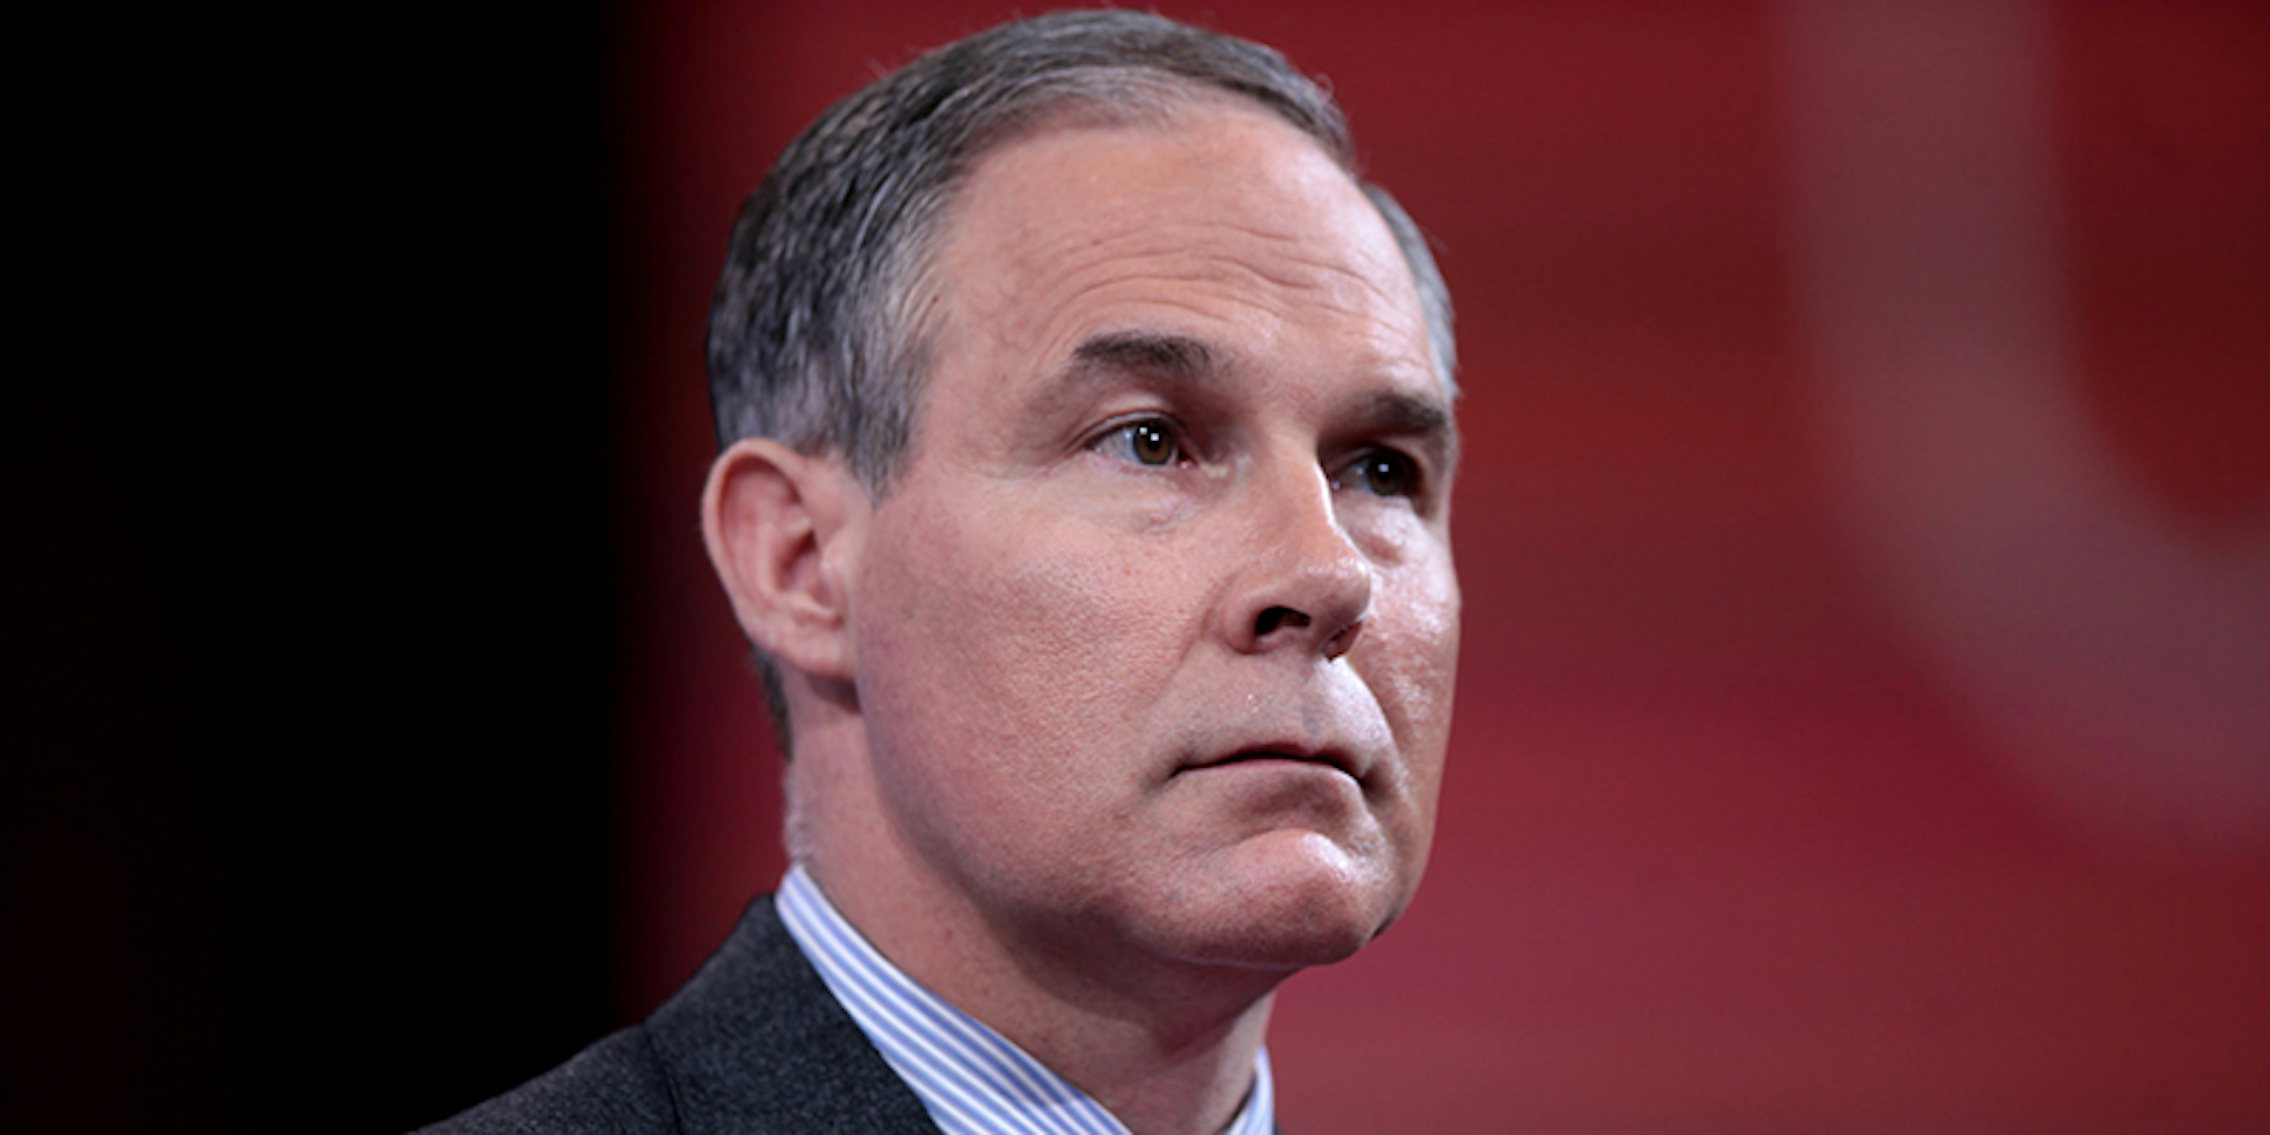 A leaked email from the EPA directed employees to deemphasize climate science.